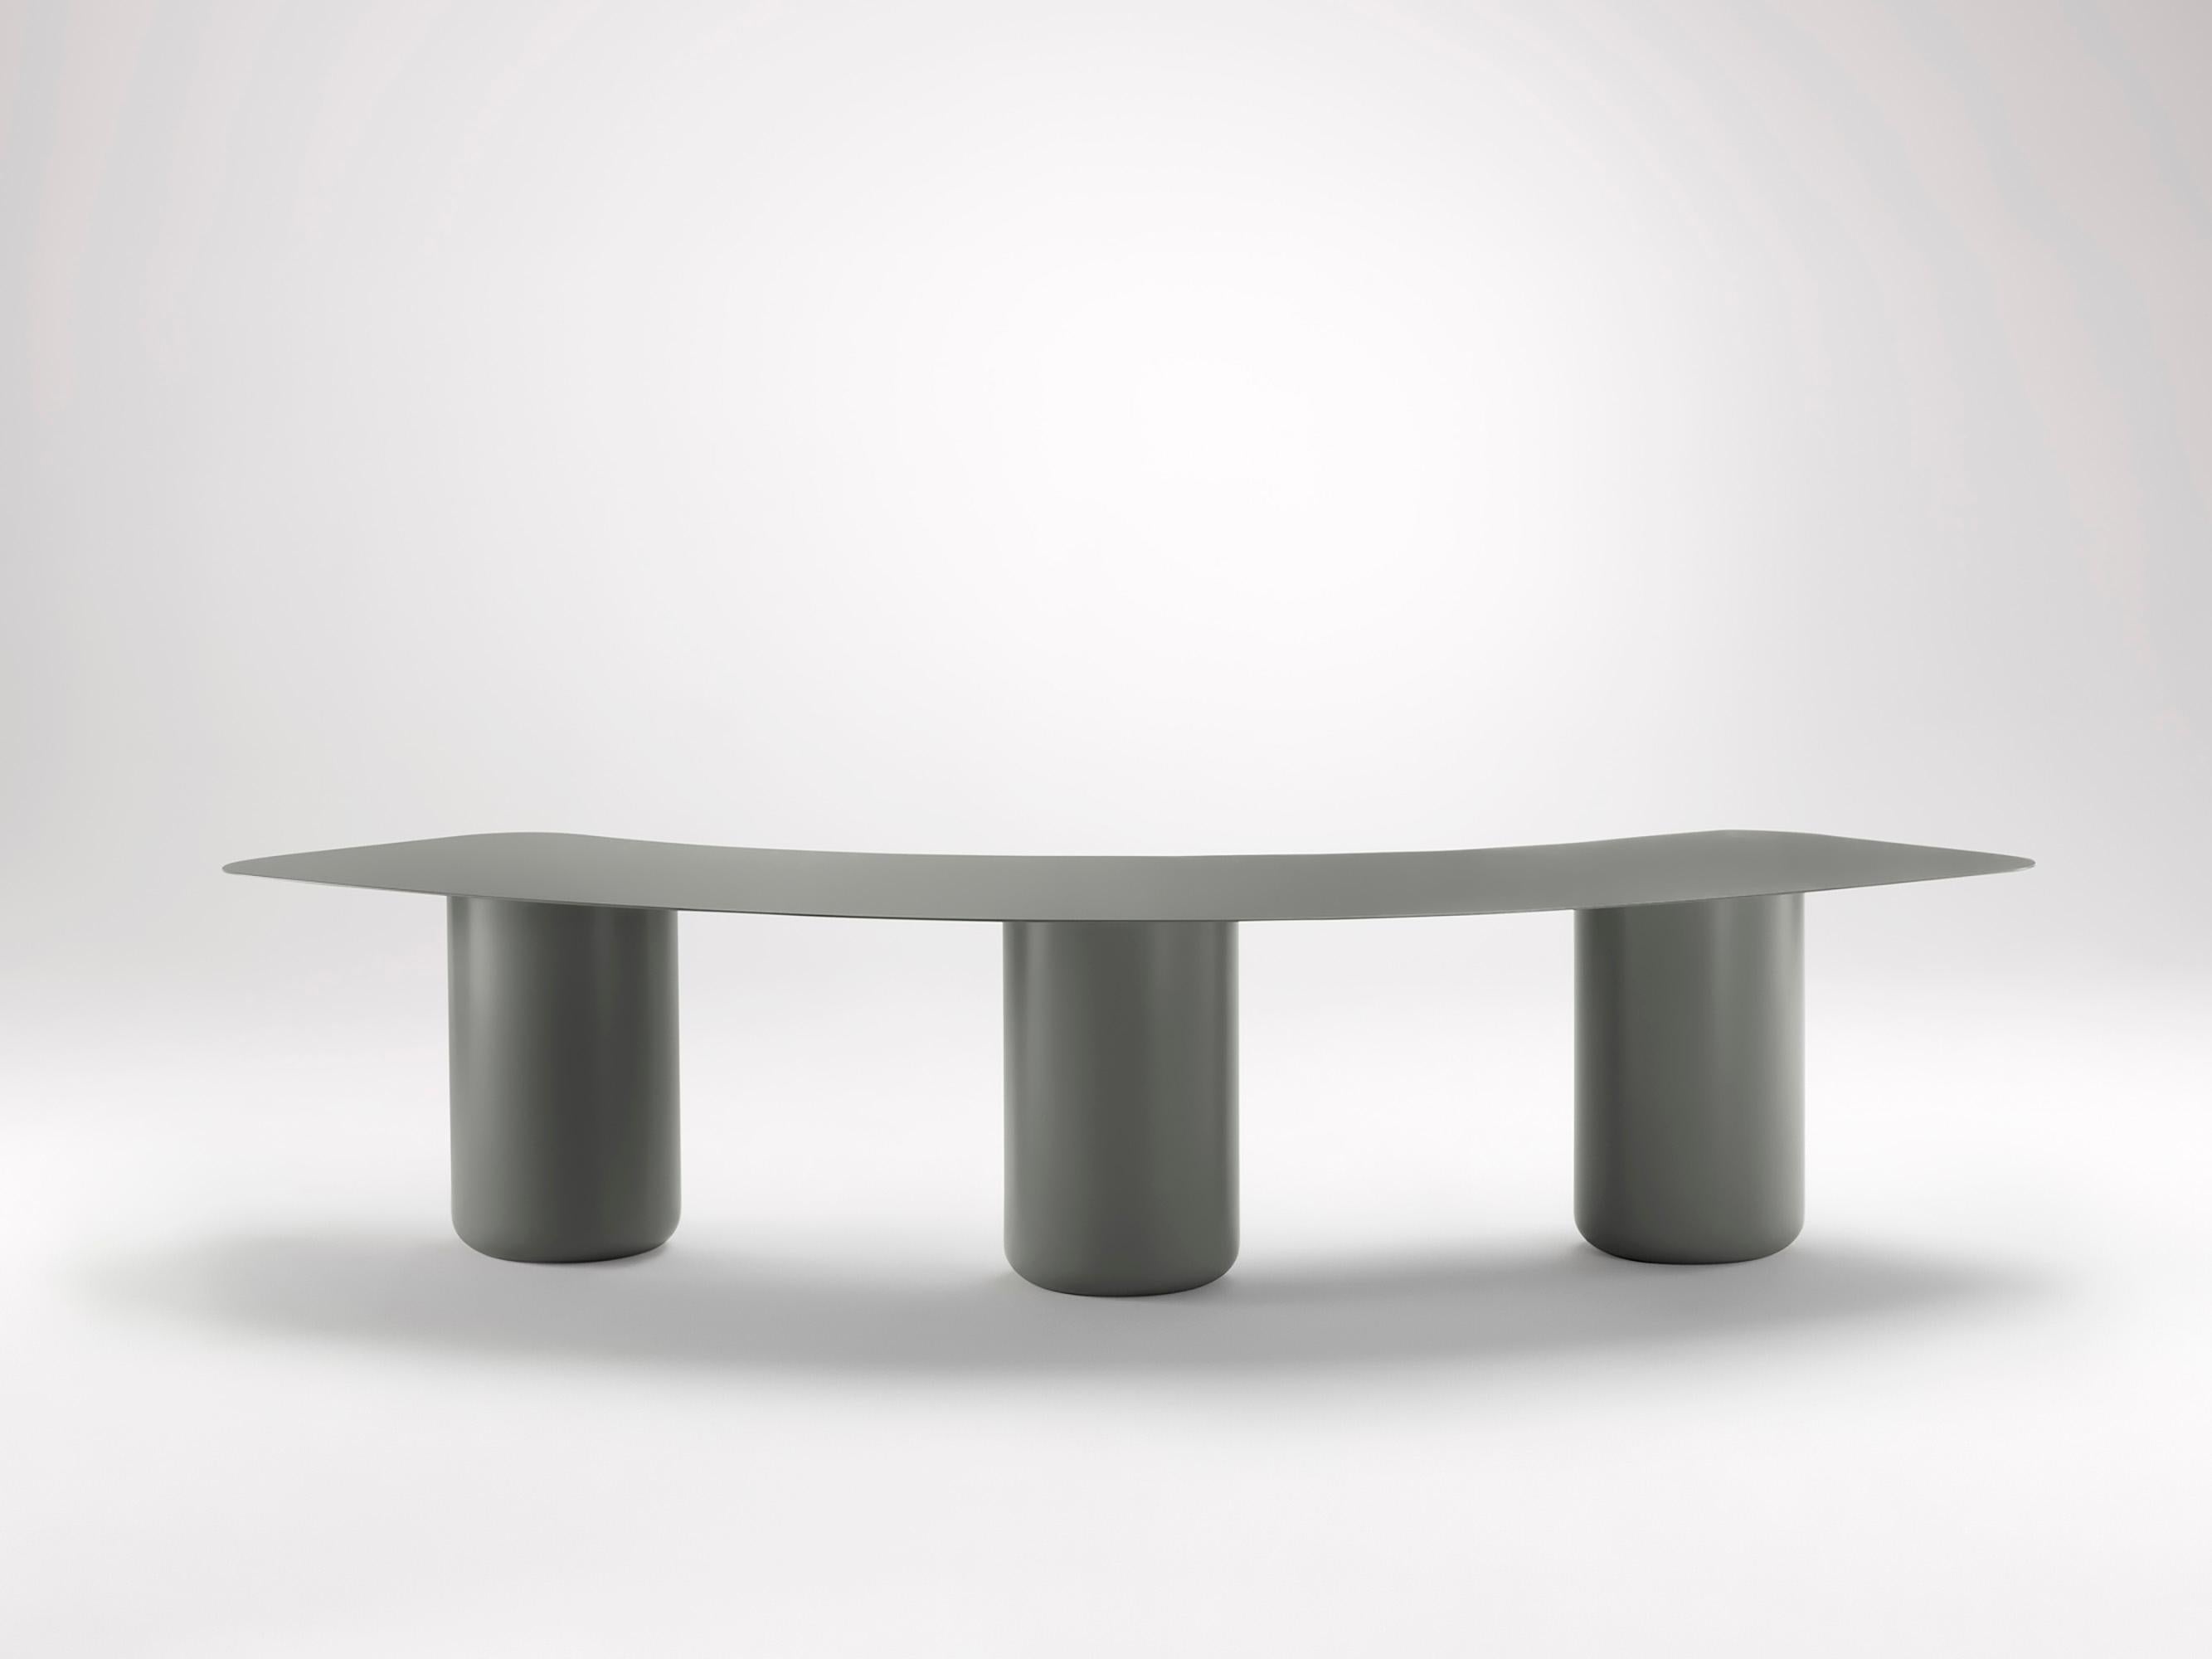 Large Woodland Grey Curved Bench by Coco Flip
Dimensions: D 75 x W 200 x H 42 cm
Materials: Mild steel, powder-coated with zinc undercoat. 
Weight: 44 kg

Coco Flip is a Melbourne based furniture and lighting design studio, run by us, Kate Stokes